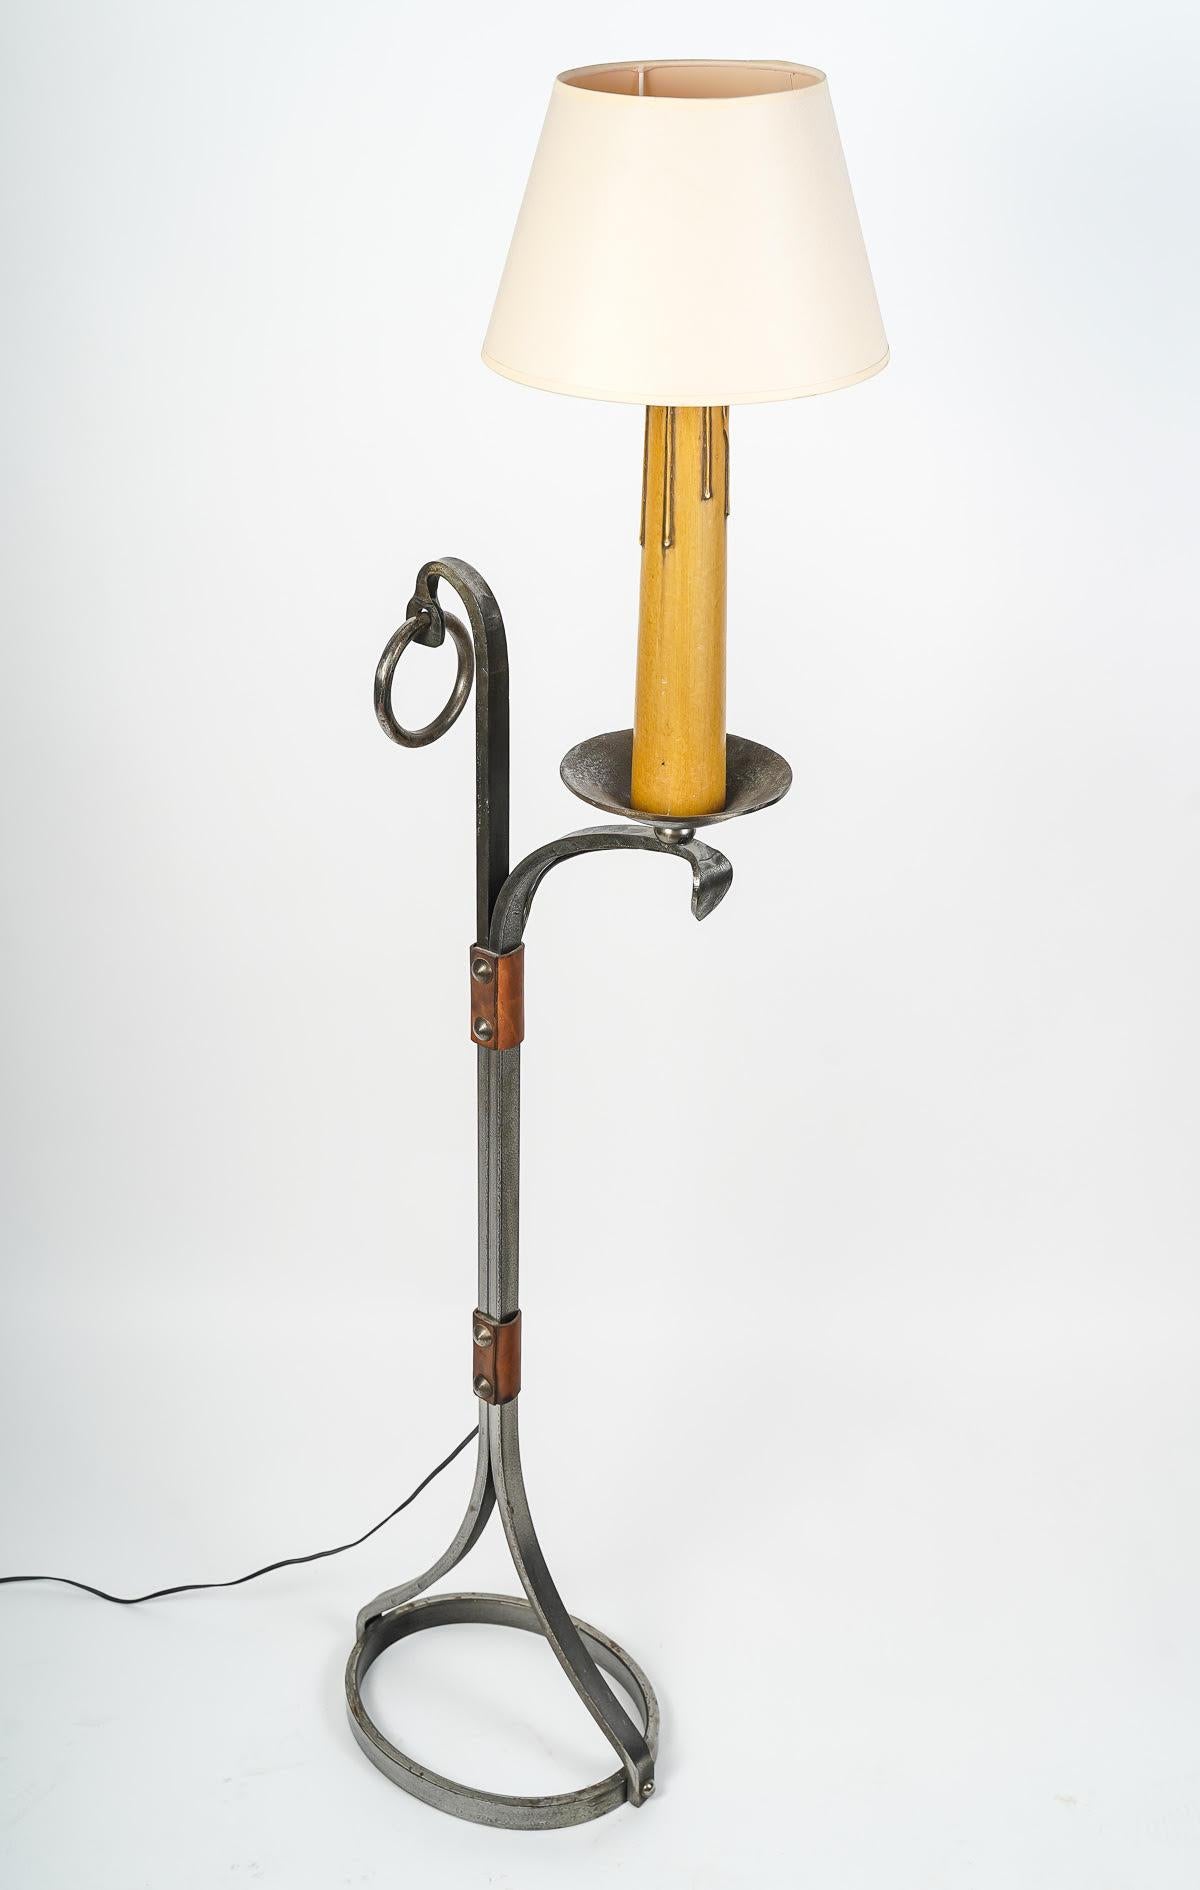 Wrought iron and copper floor lamp from the 1960s.

Elegant wrought iron and copper floor lamp from the 1960s.

Dimensions: H: 142cm, W: 44cm, D: 24cm.